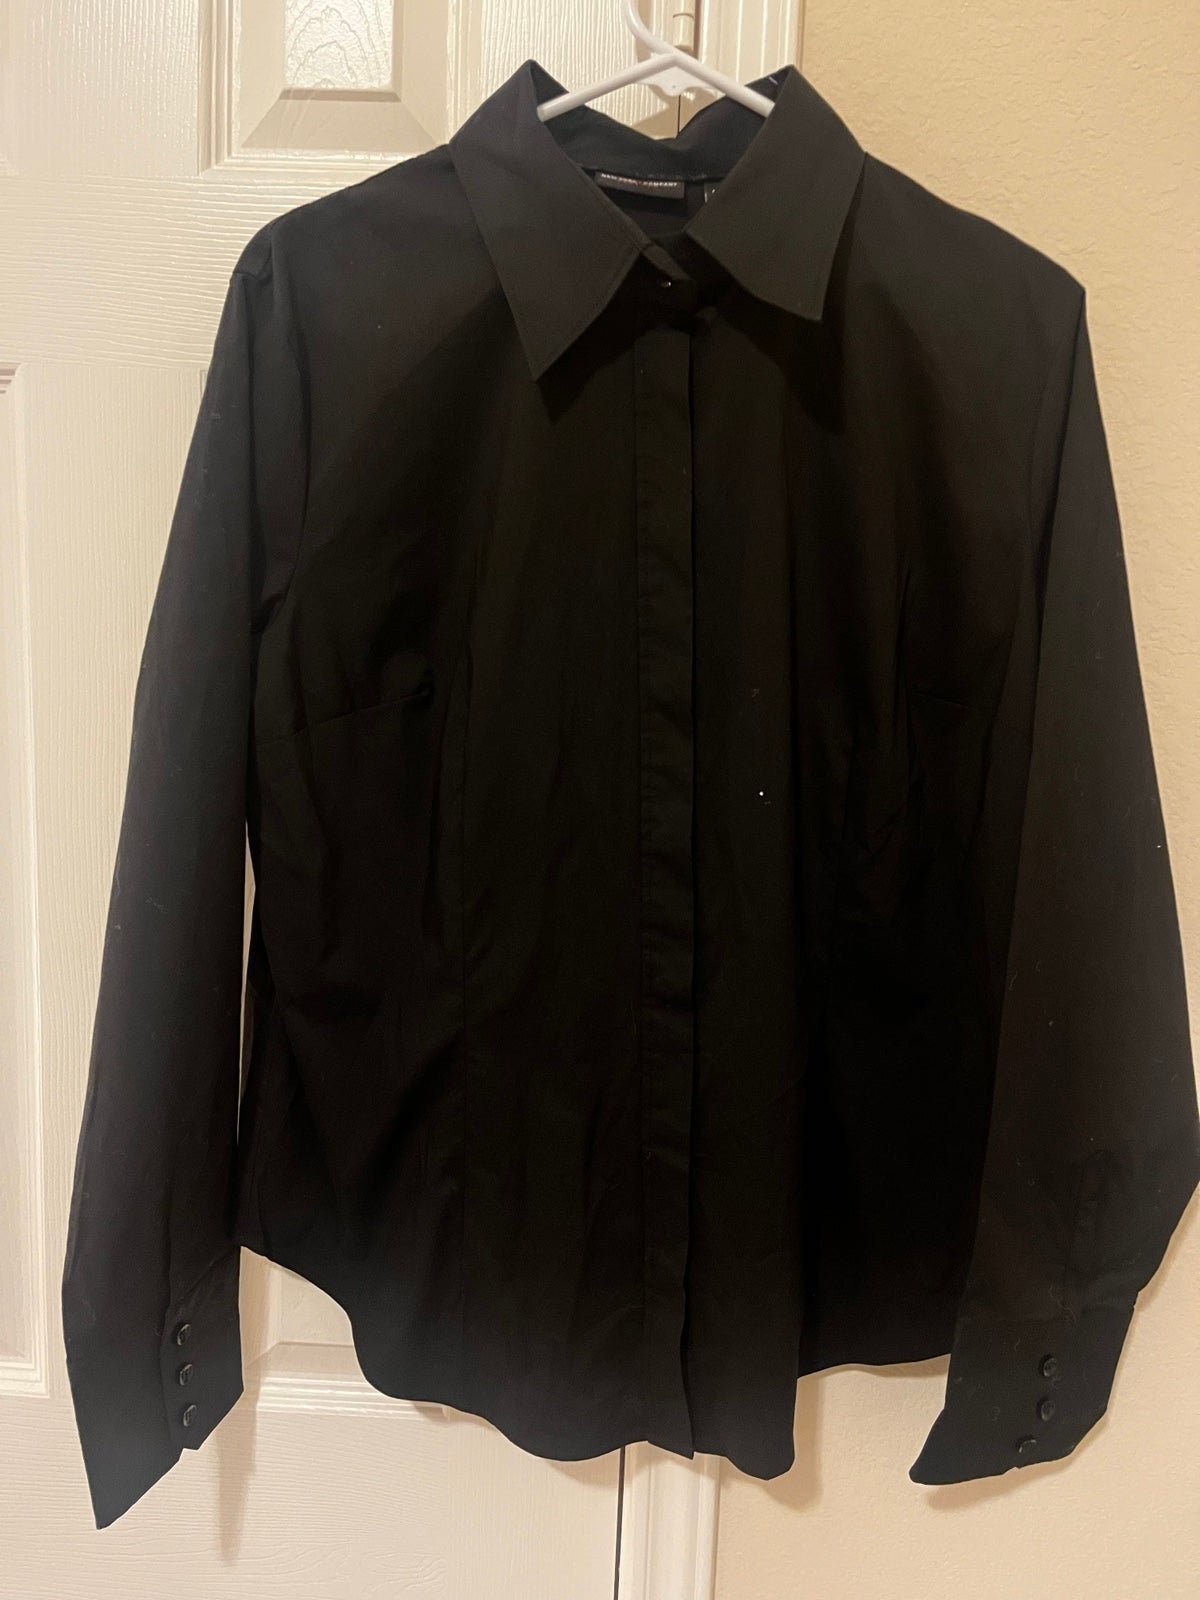 The Best Seller New York & Co womens black button up dress shirt ohiktQxKA for sale